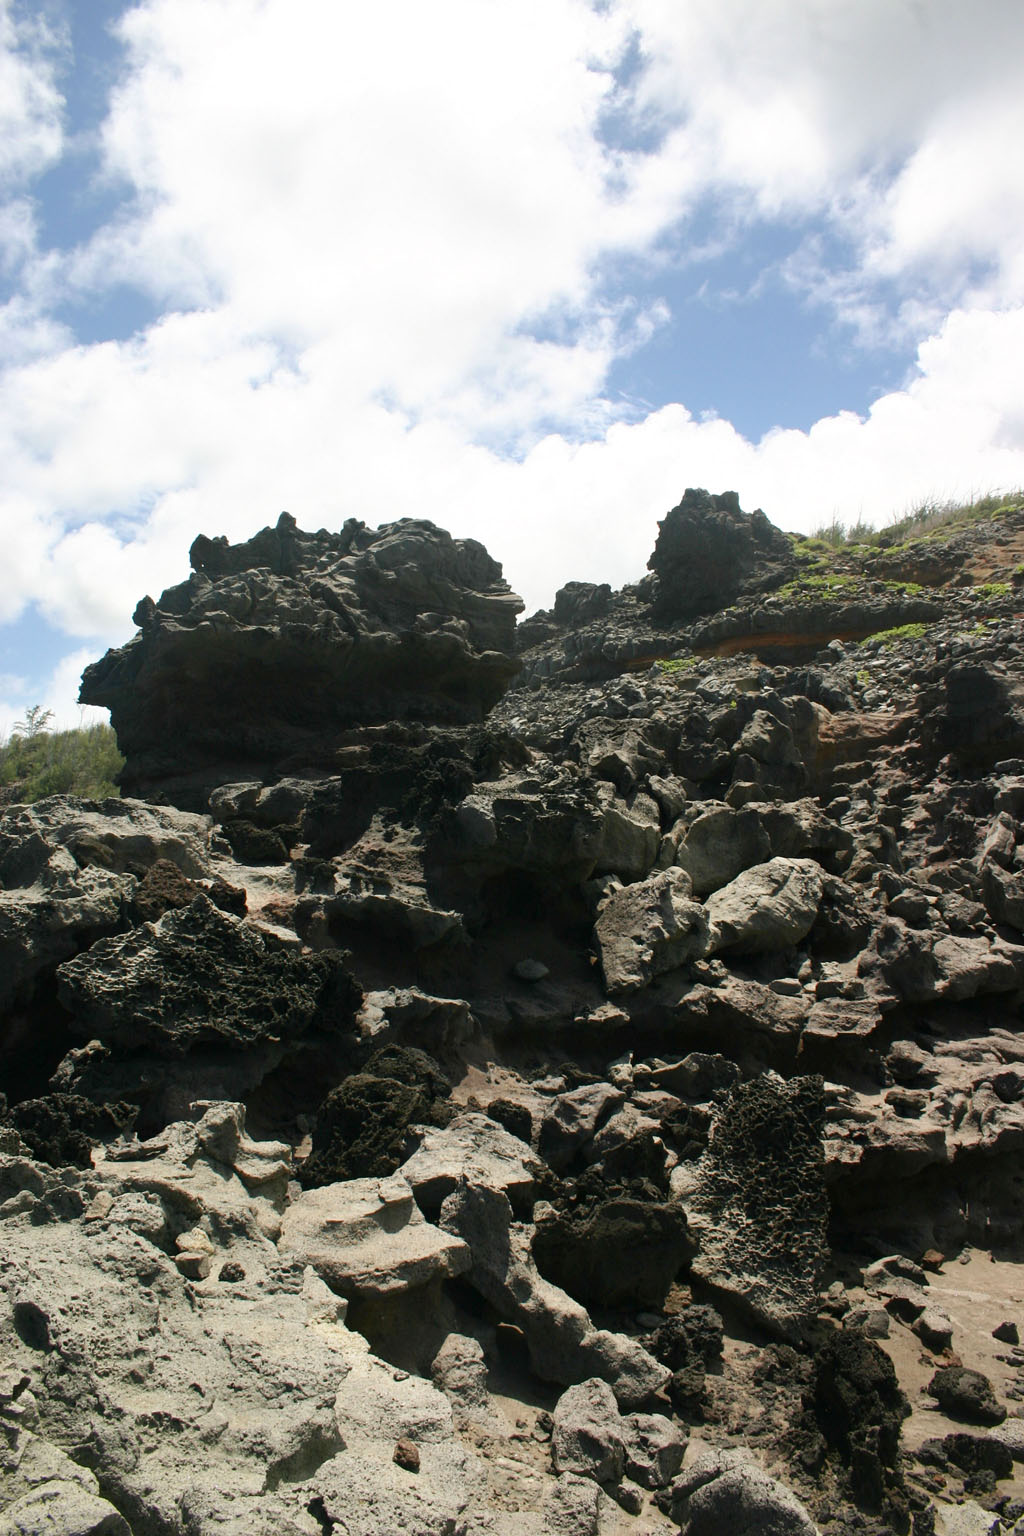 There are several well established trails down the jagged lava, but don't trip!